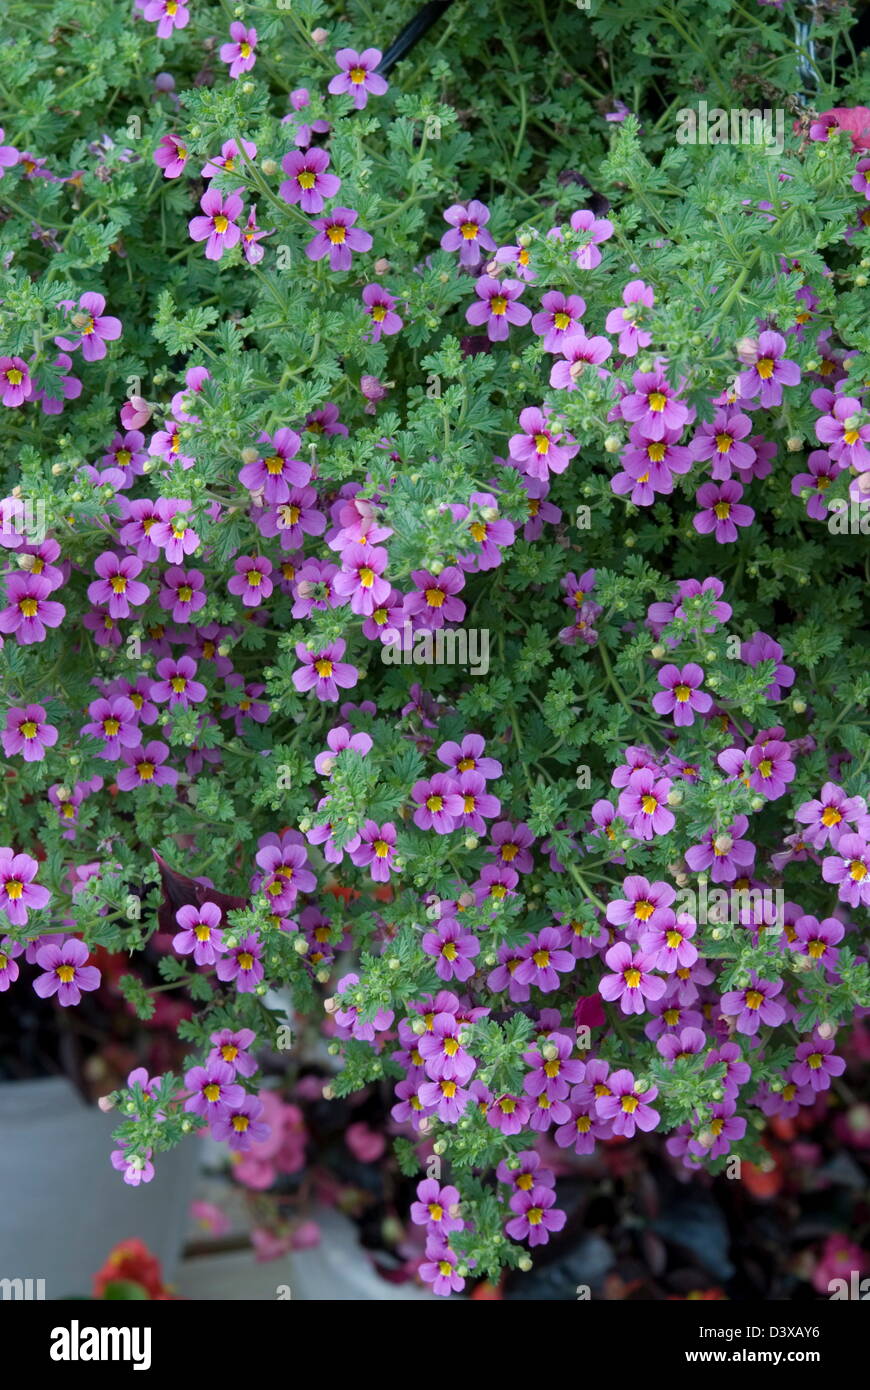 Bacopa 'Cinderella Lavender'. Date: 03.11.2008 Ref: ZB907 123496 0059 COMPULSORY CREDIT: Photos Horticultural/Photoshot Stock Photo